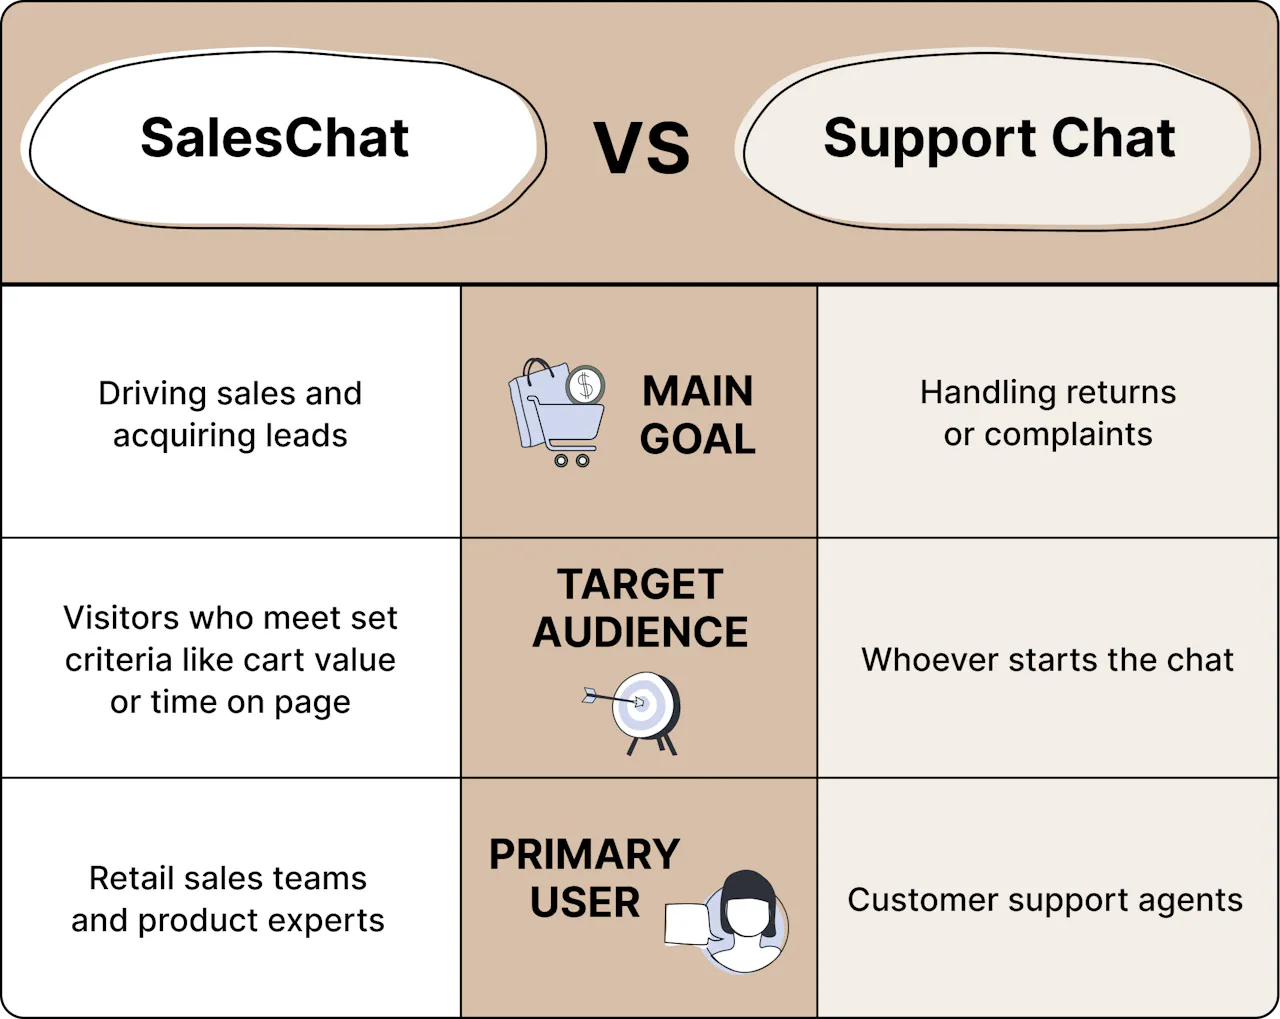 Endear SalesChat vs Support Chat